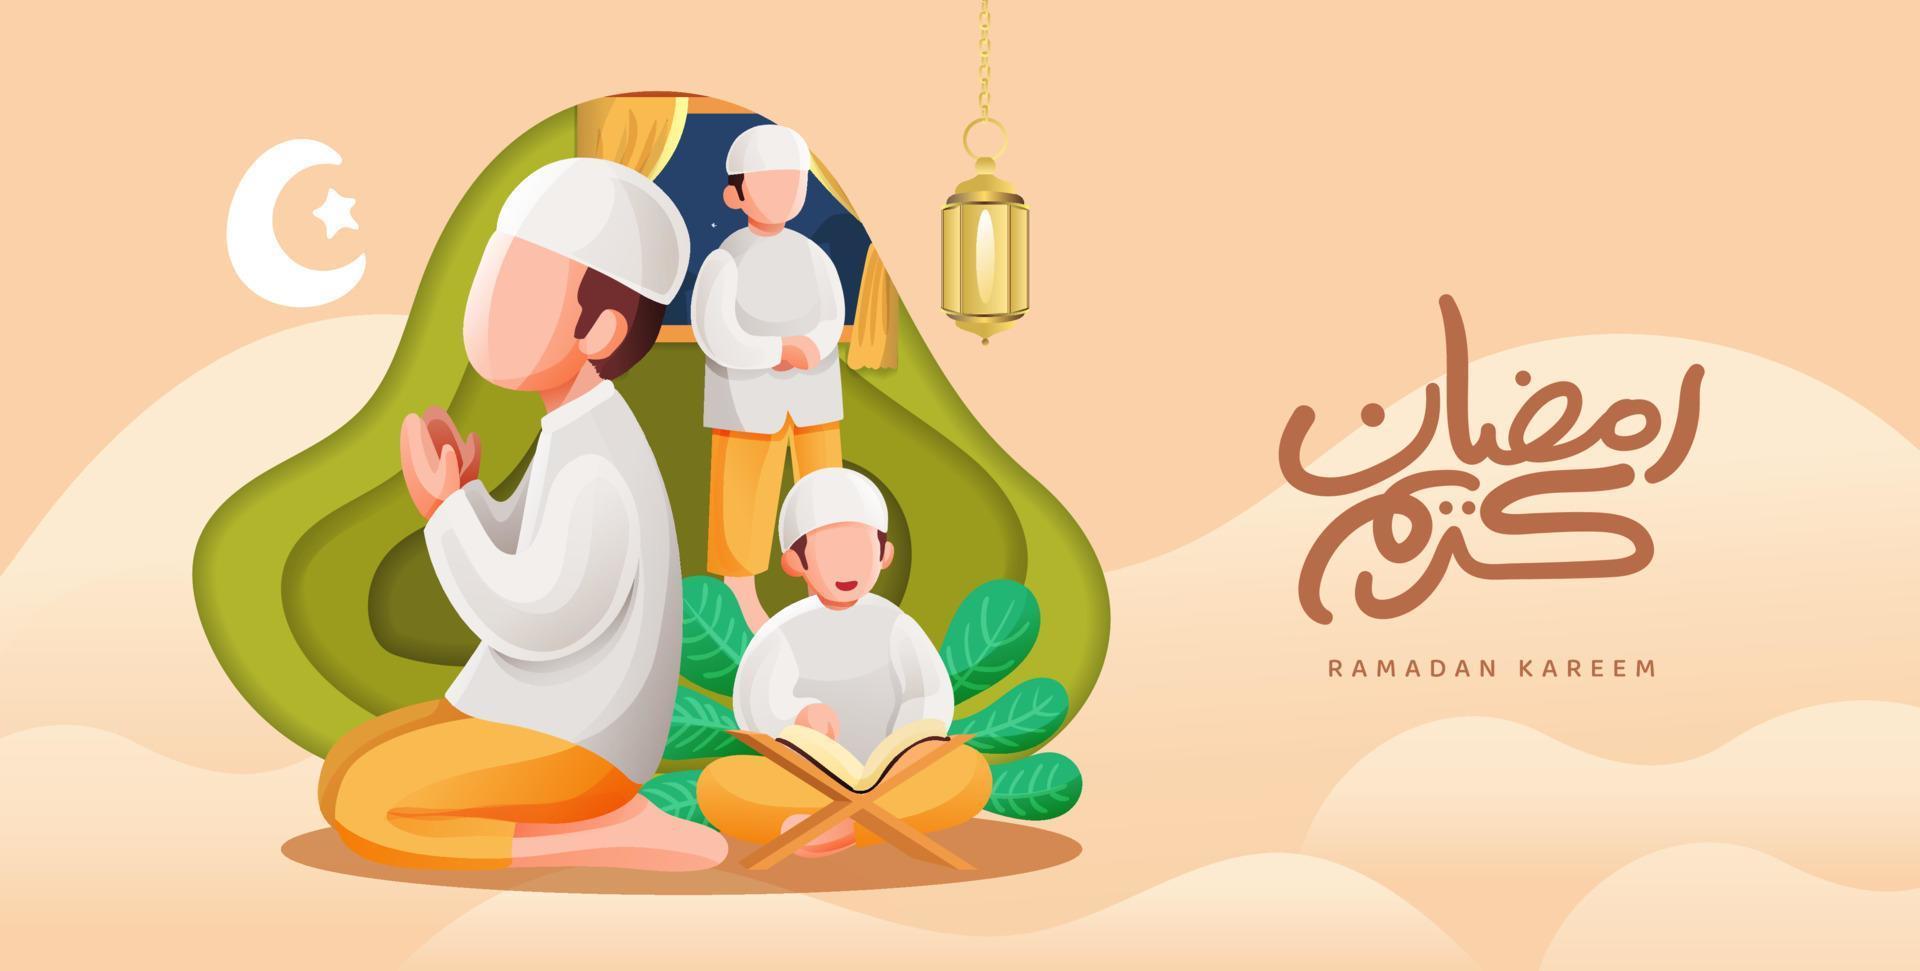 Ramadan Creative Illustration With Man Praying and Read Quran Composition vector